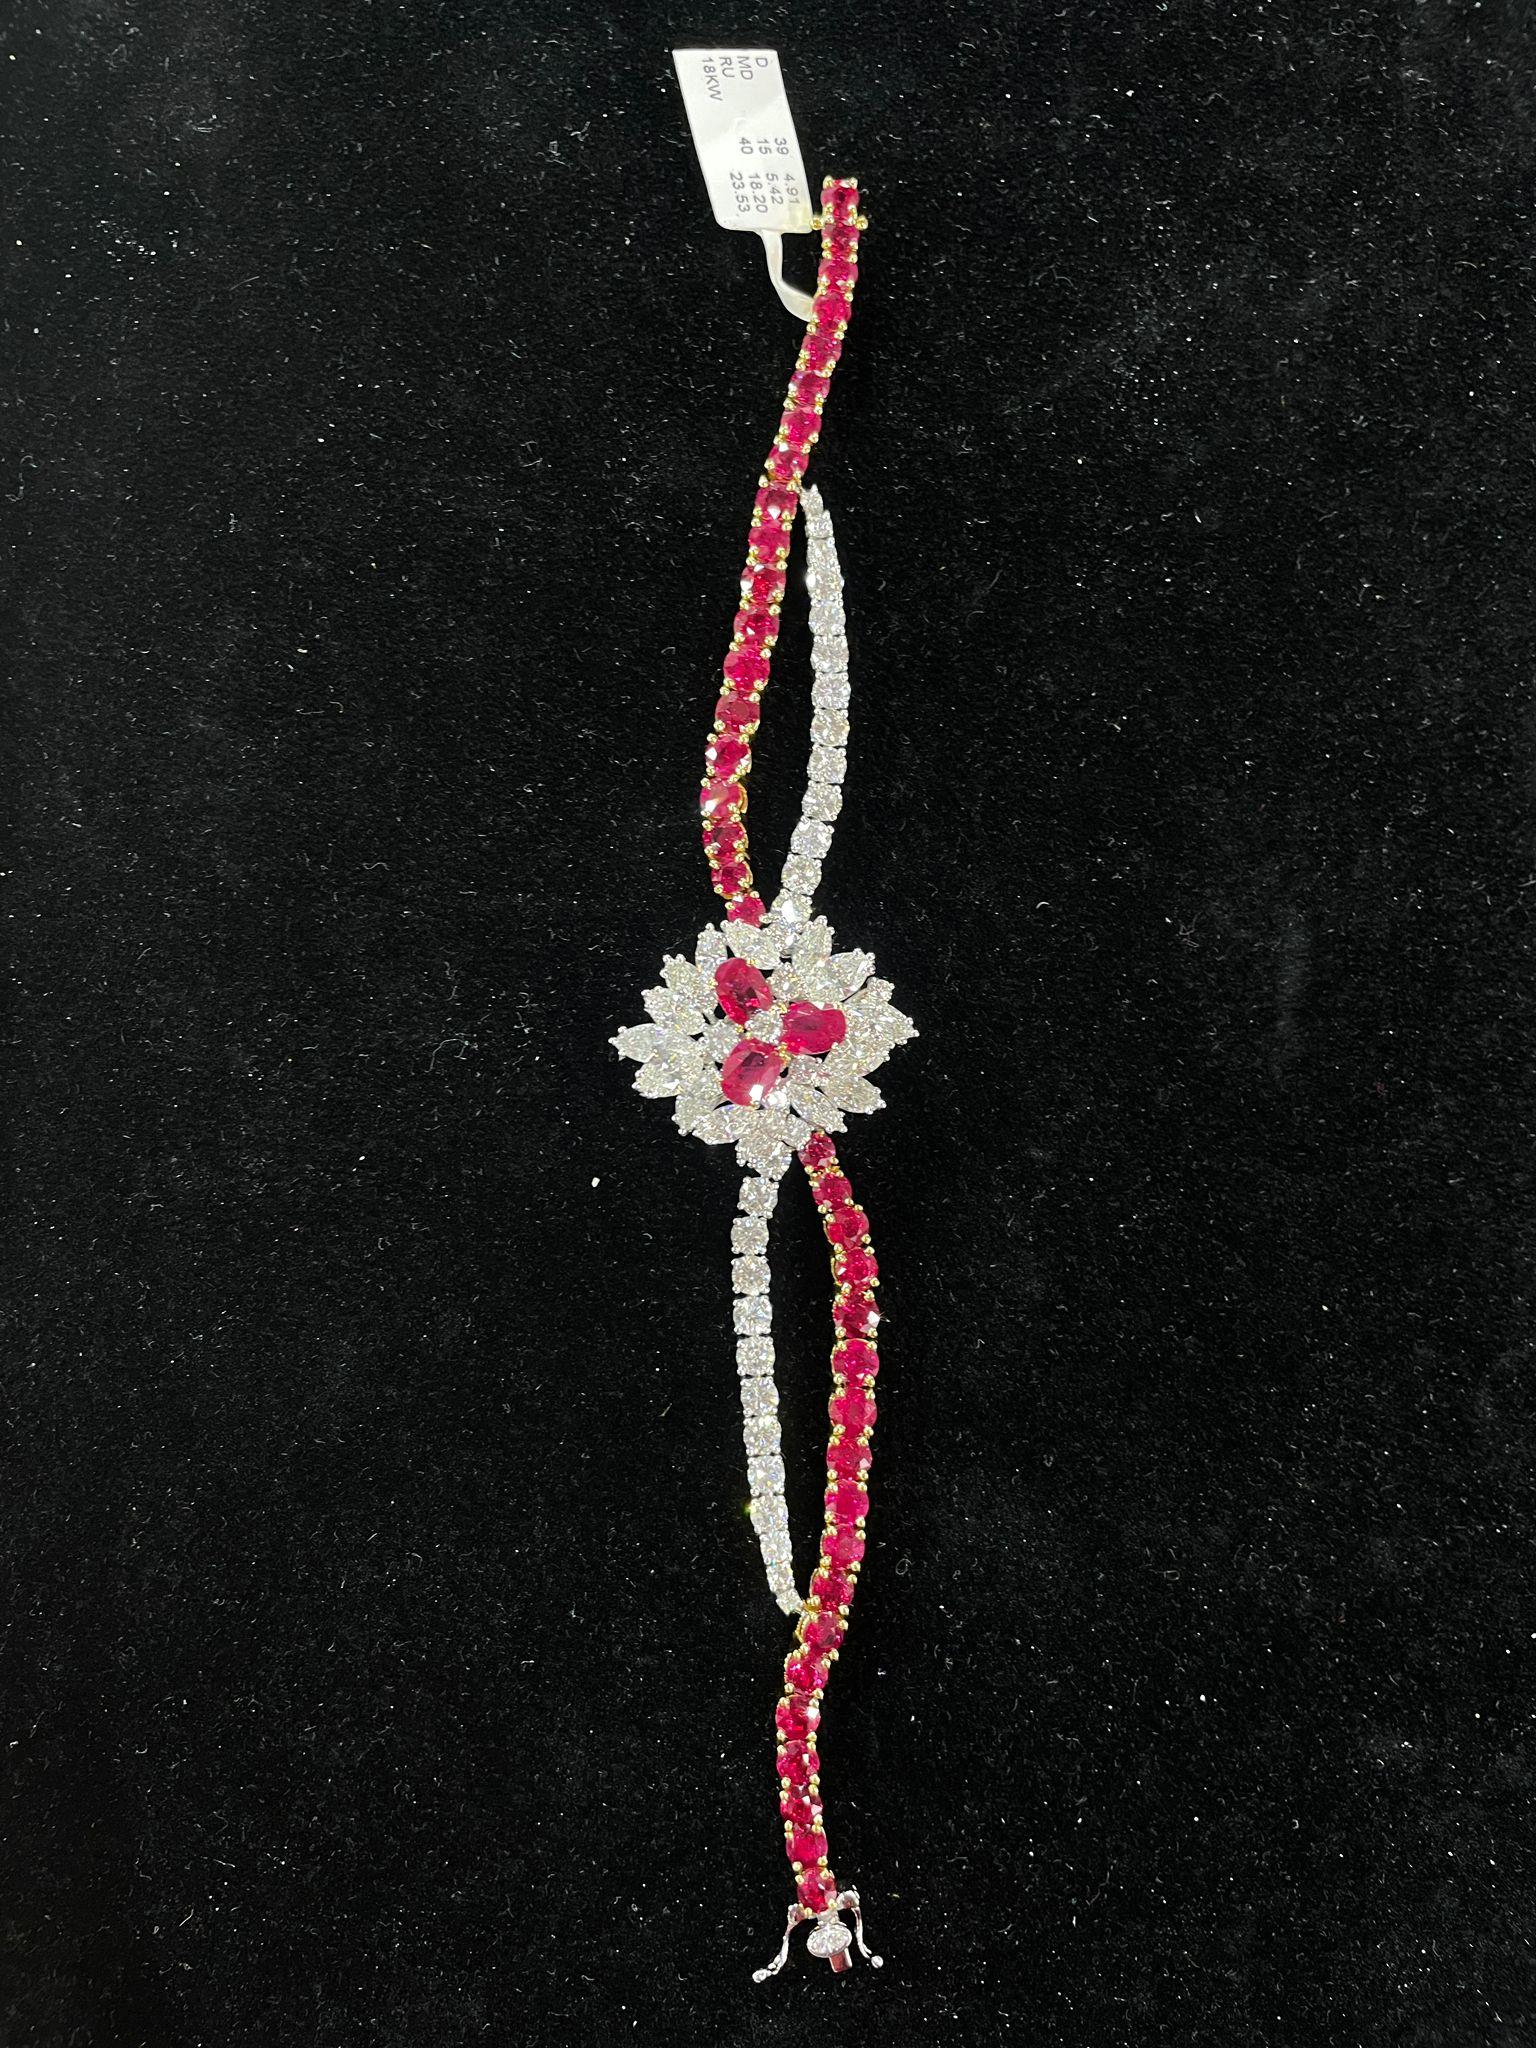 The Following Item we are offering is this Rare Important Radiant 18KT Gold Gorgeous Glittering and Sparkling Magnificent Fancy Rare Large Burmese Ruby and Diamond Bracelet. Bracelet contains approx 30CTS of Beautiful Large Fancy Burmese Rubies with